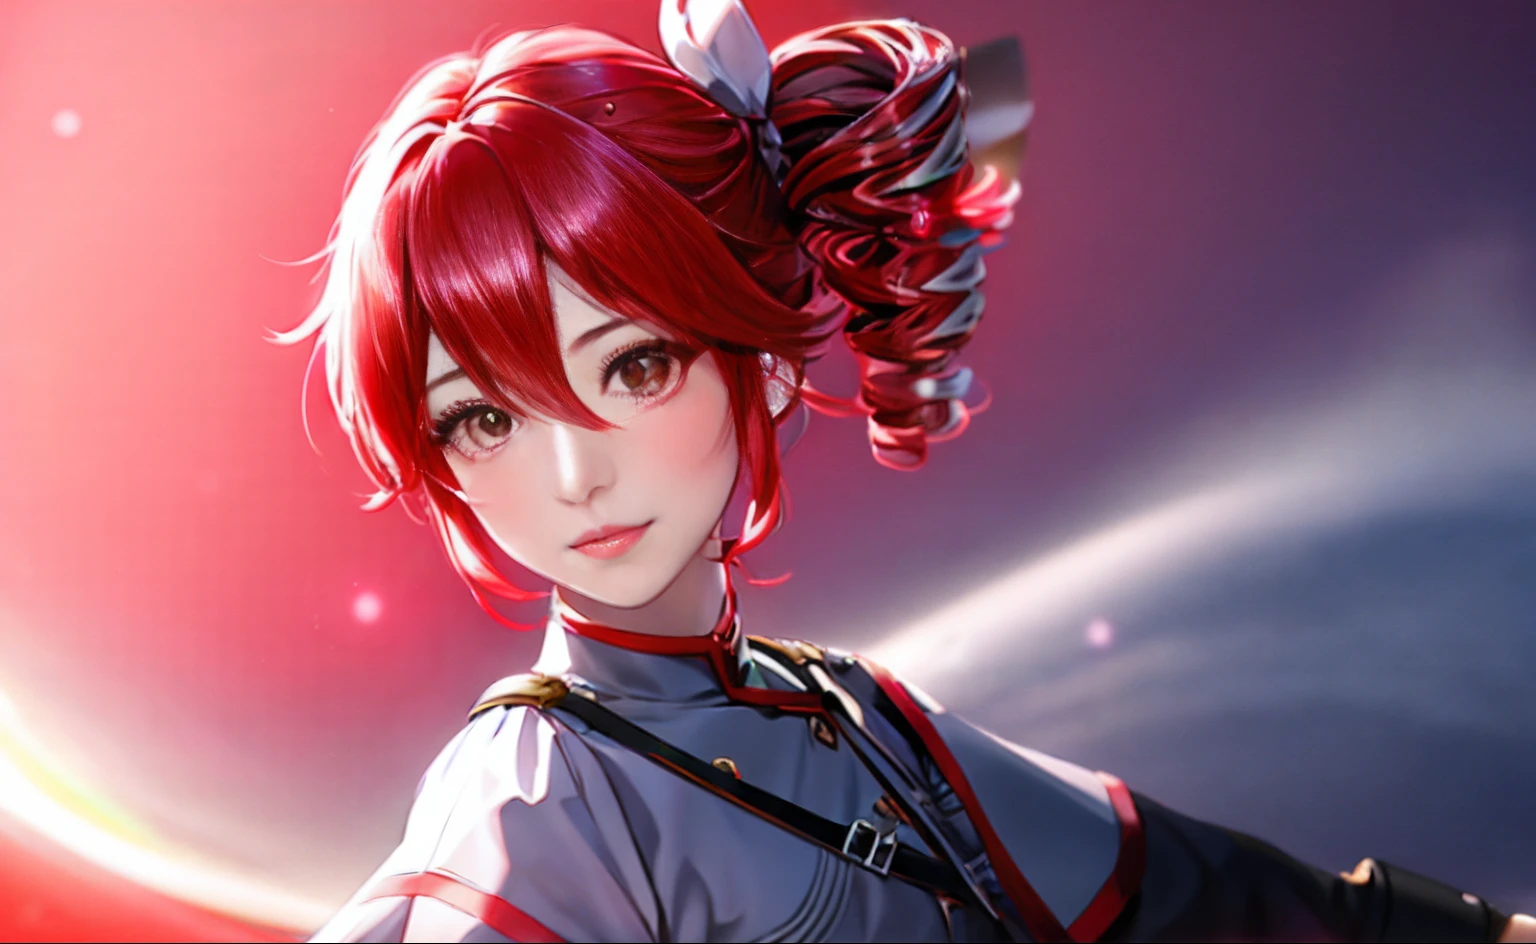 Anime girl with red hair and city bow, from arknights, Female protagonist 👀 :8, Ayaka Genshin Impact, , Glowing red eyes, Red Eyes,  Red lips, White shirt, Beautiful, trendy outfit, pirate clothing, smart, Realistic, anime eyes, Digital Painting,  CGI ART, fantasy setting, masutepiece, detaileds, 4K, Night, dark sky, Aurora, High detail lights, Cinematic Light, Combat readiness, Orange glow, hightquality,  Picture-perfect face, flawless, clean, masutepiece, (((sharp))) ((Focus)) (Instagram) (8K) masutepiece, a digital painting masterpiece, Best Quality, absurdly high resolution, [tight corset|gown], delicate tracing, loimu,Ruins, Swirling magic,  Detailed background, Moon in the sky, shiny reflection, Intricate details, Shiny hair, Lustrous skin, Smooth, Aesthetic